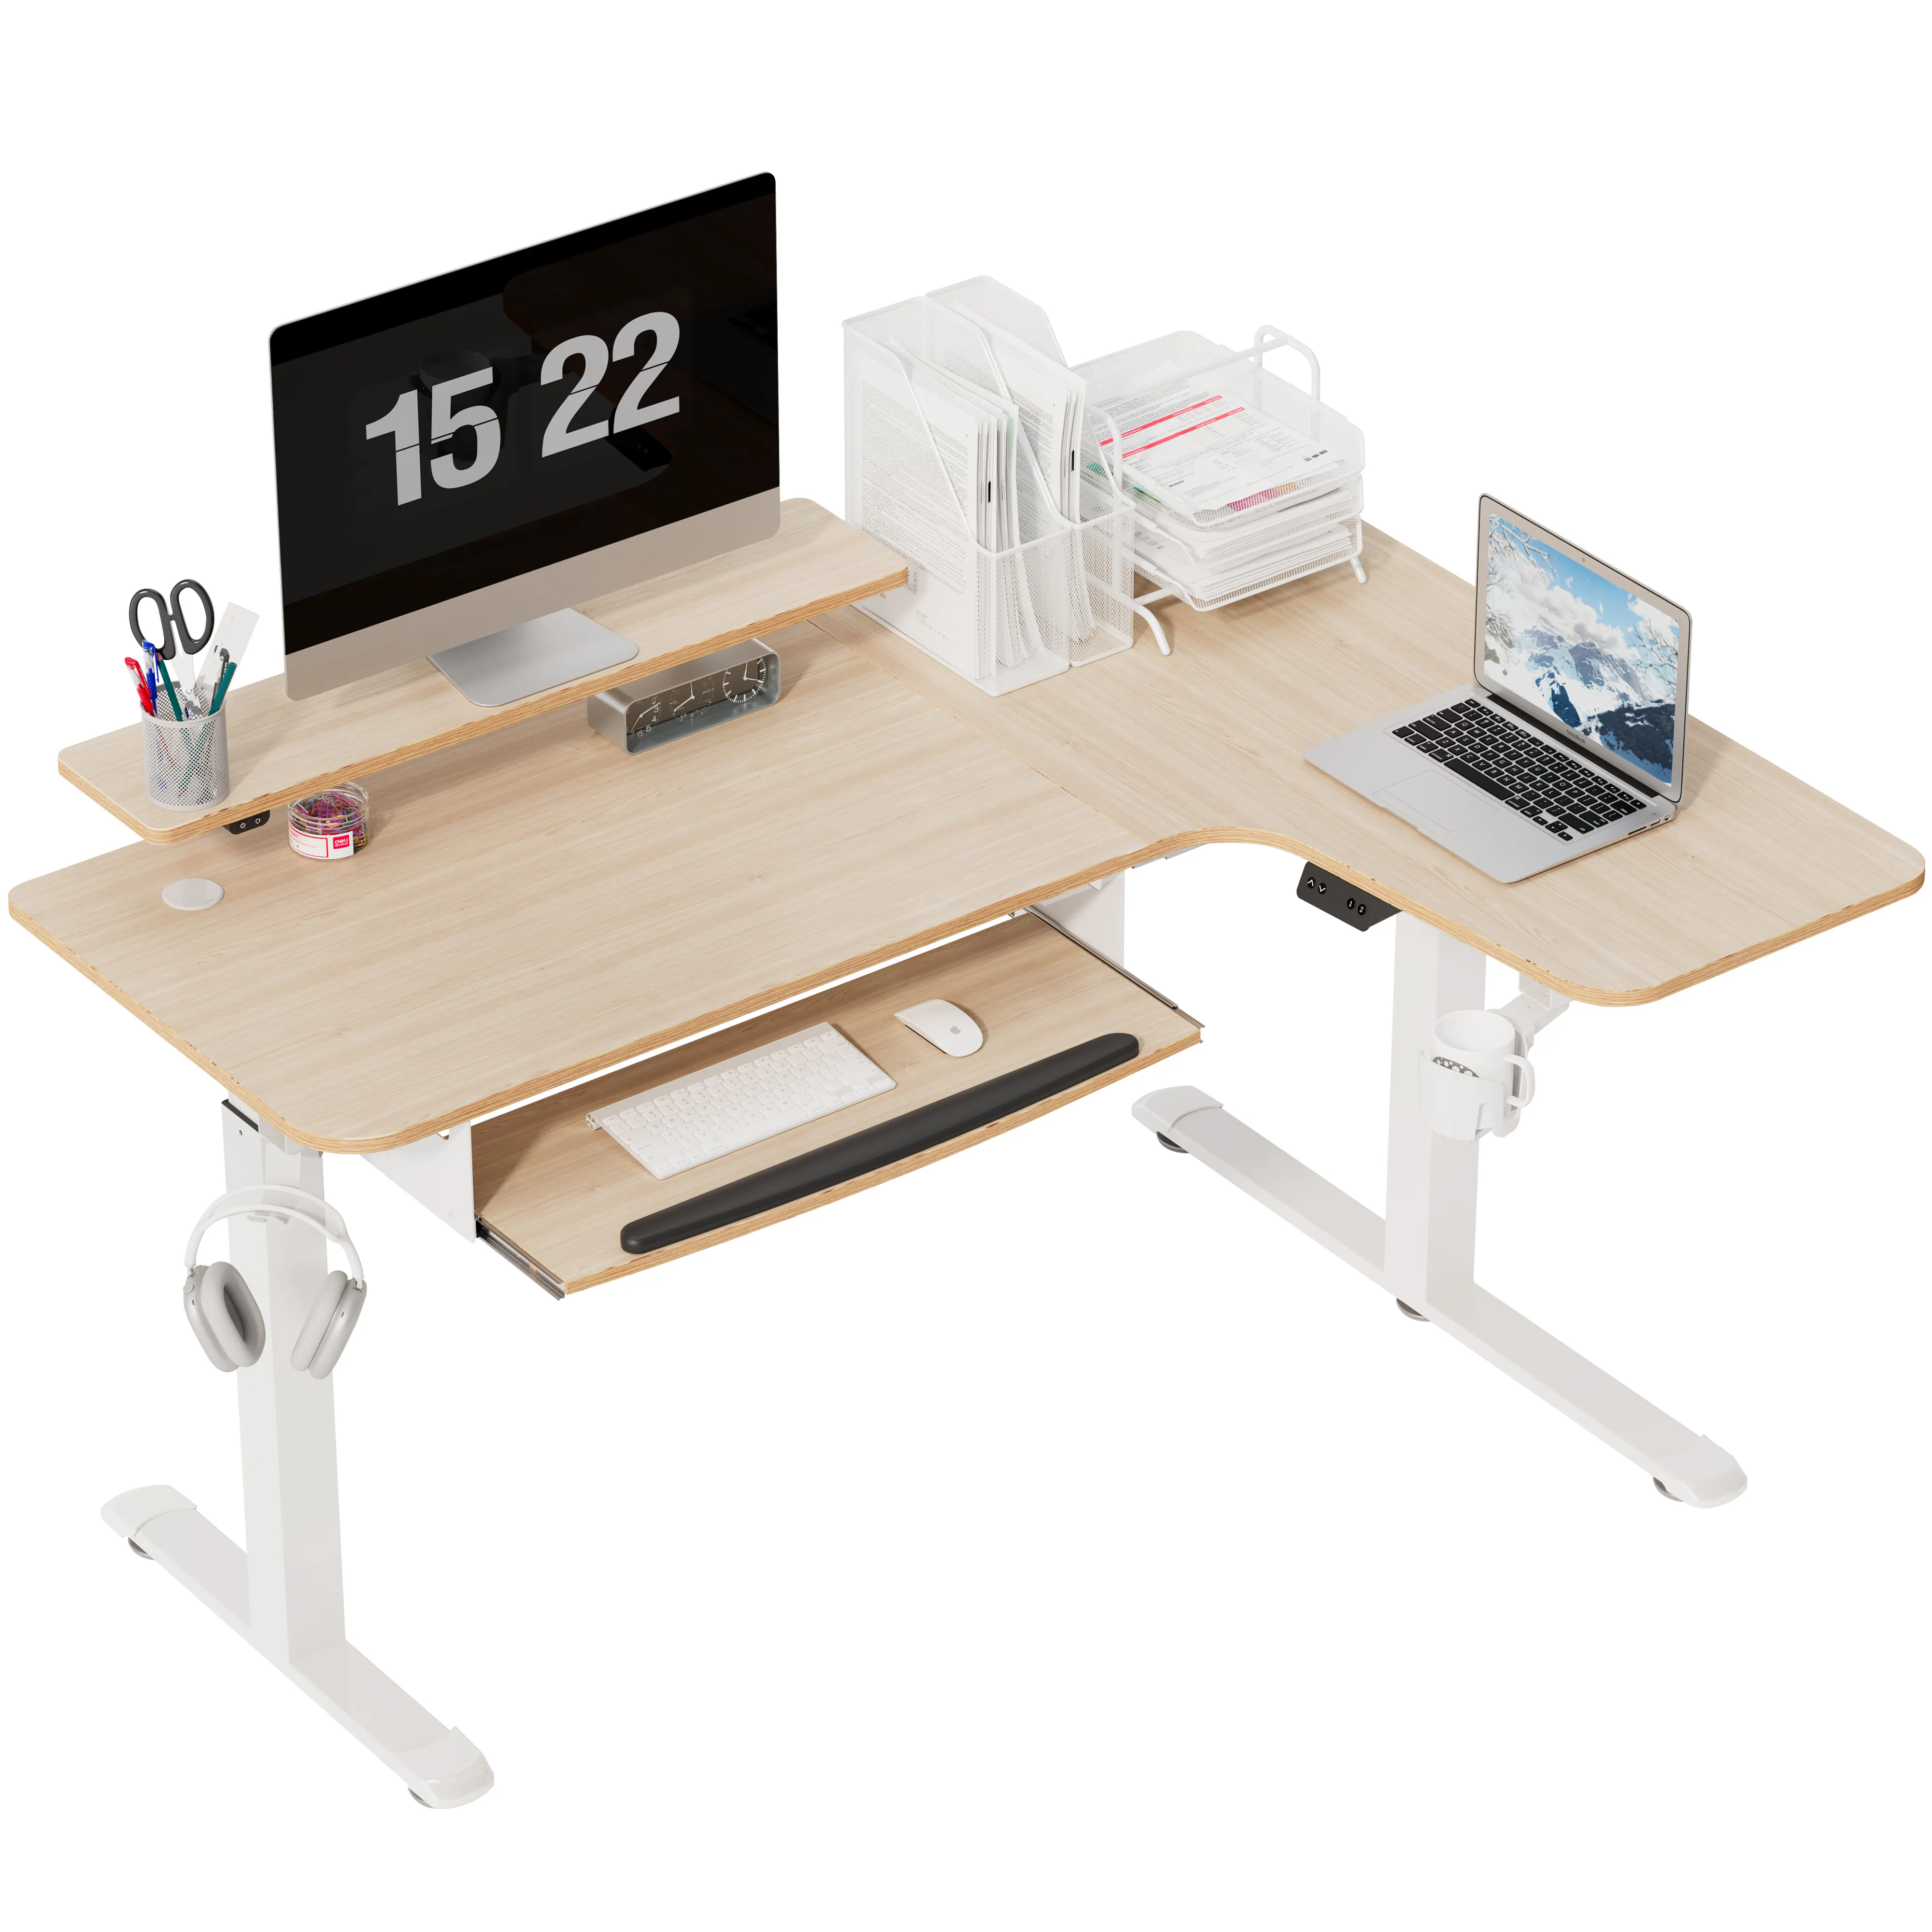 L-Shaped Electric Height Adjustable Office Desk W Keyboard Tray, 61" Electric Standing Computer Desk W Monitor Stand, Maple/R